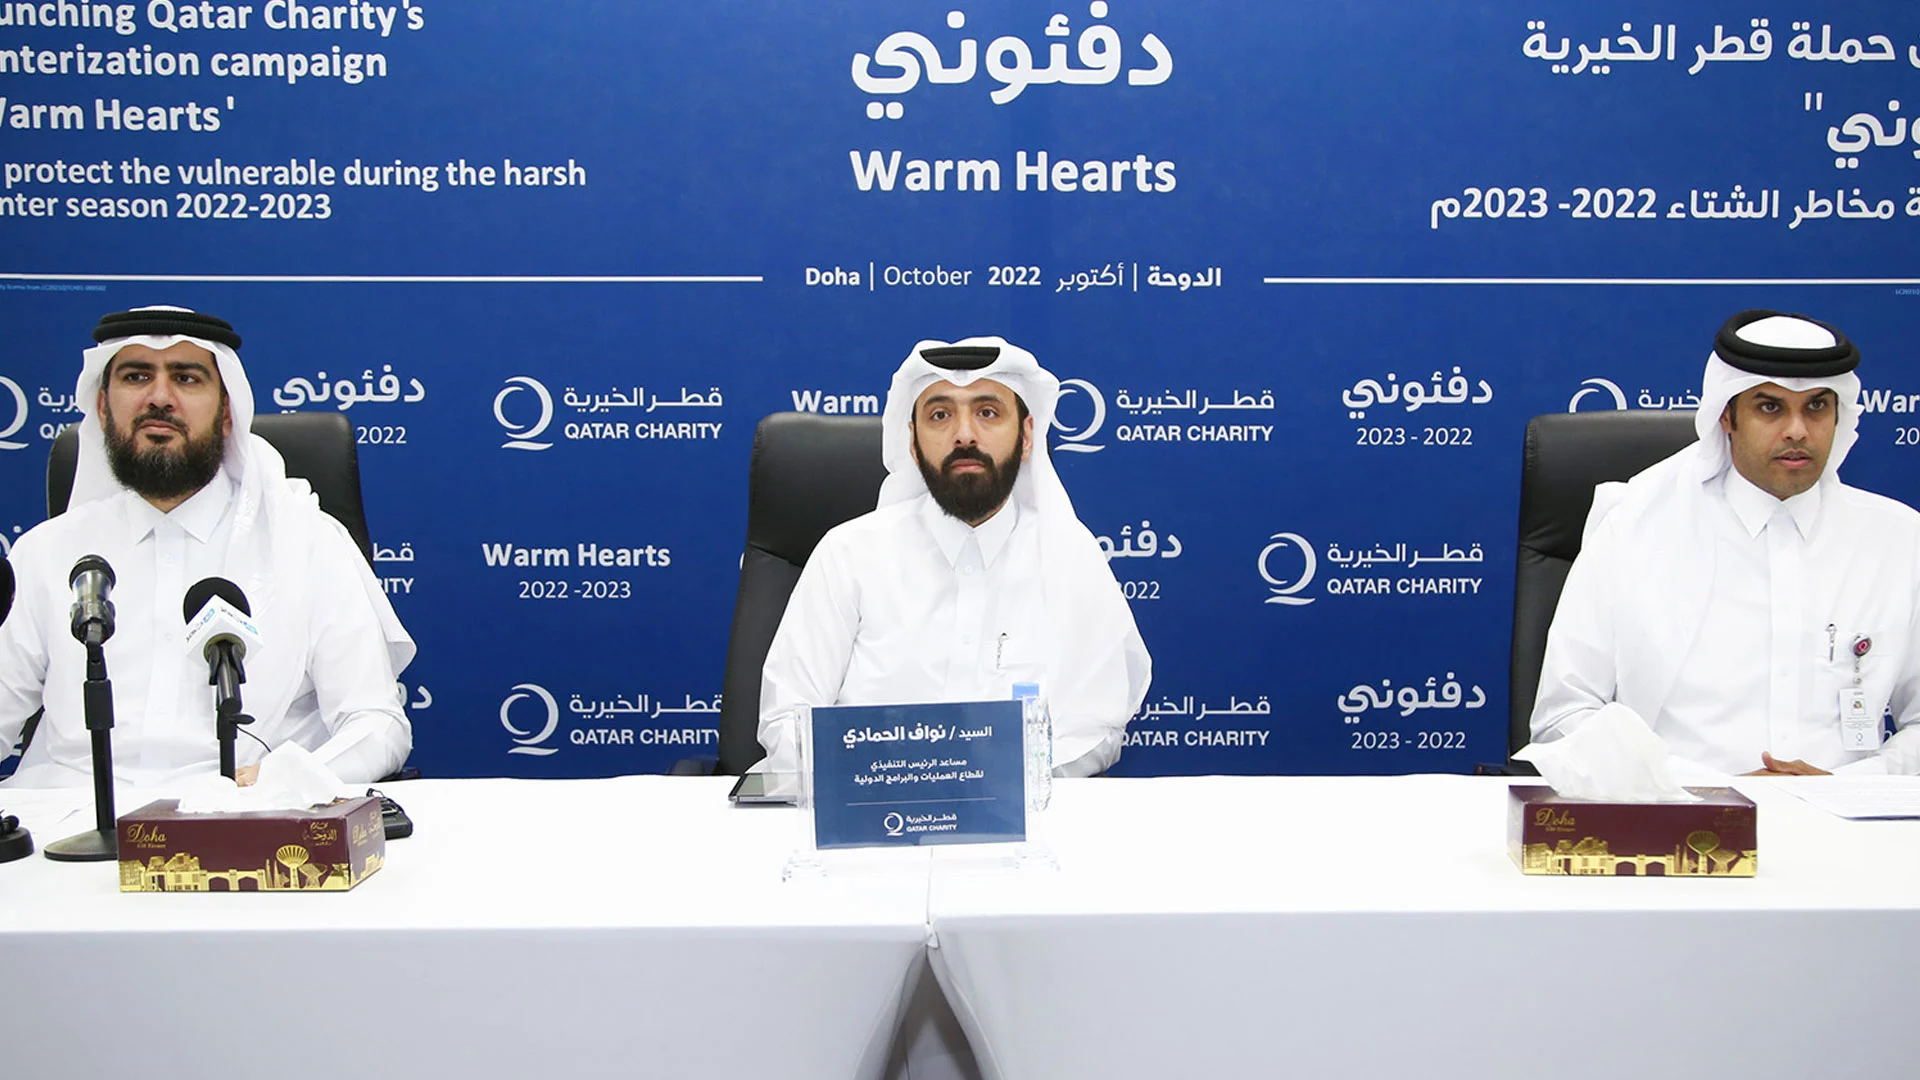 QC Launches "Warm Hearts" Campaign to Counter Winter Risks in 15 Countries Worldwide